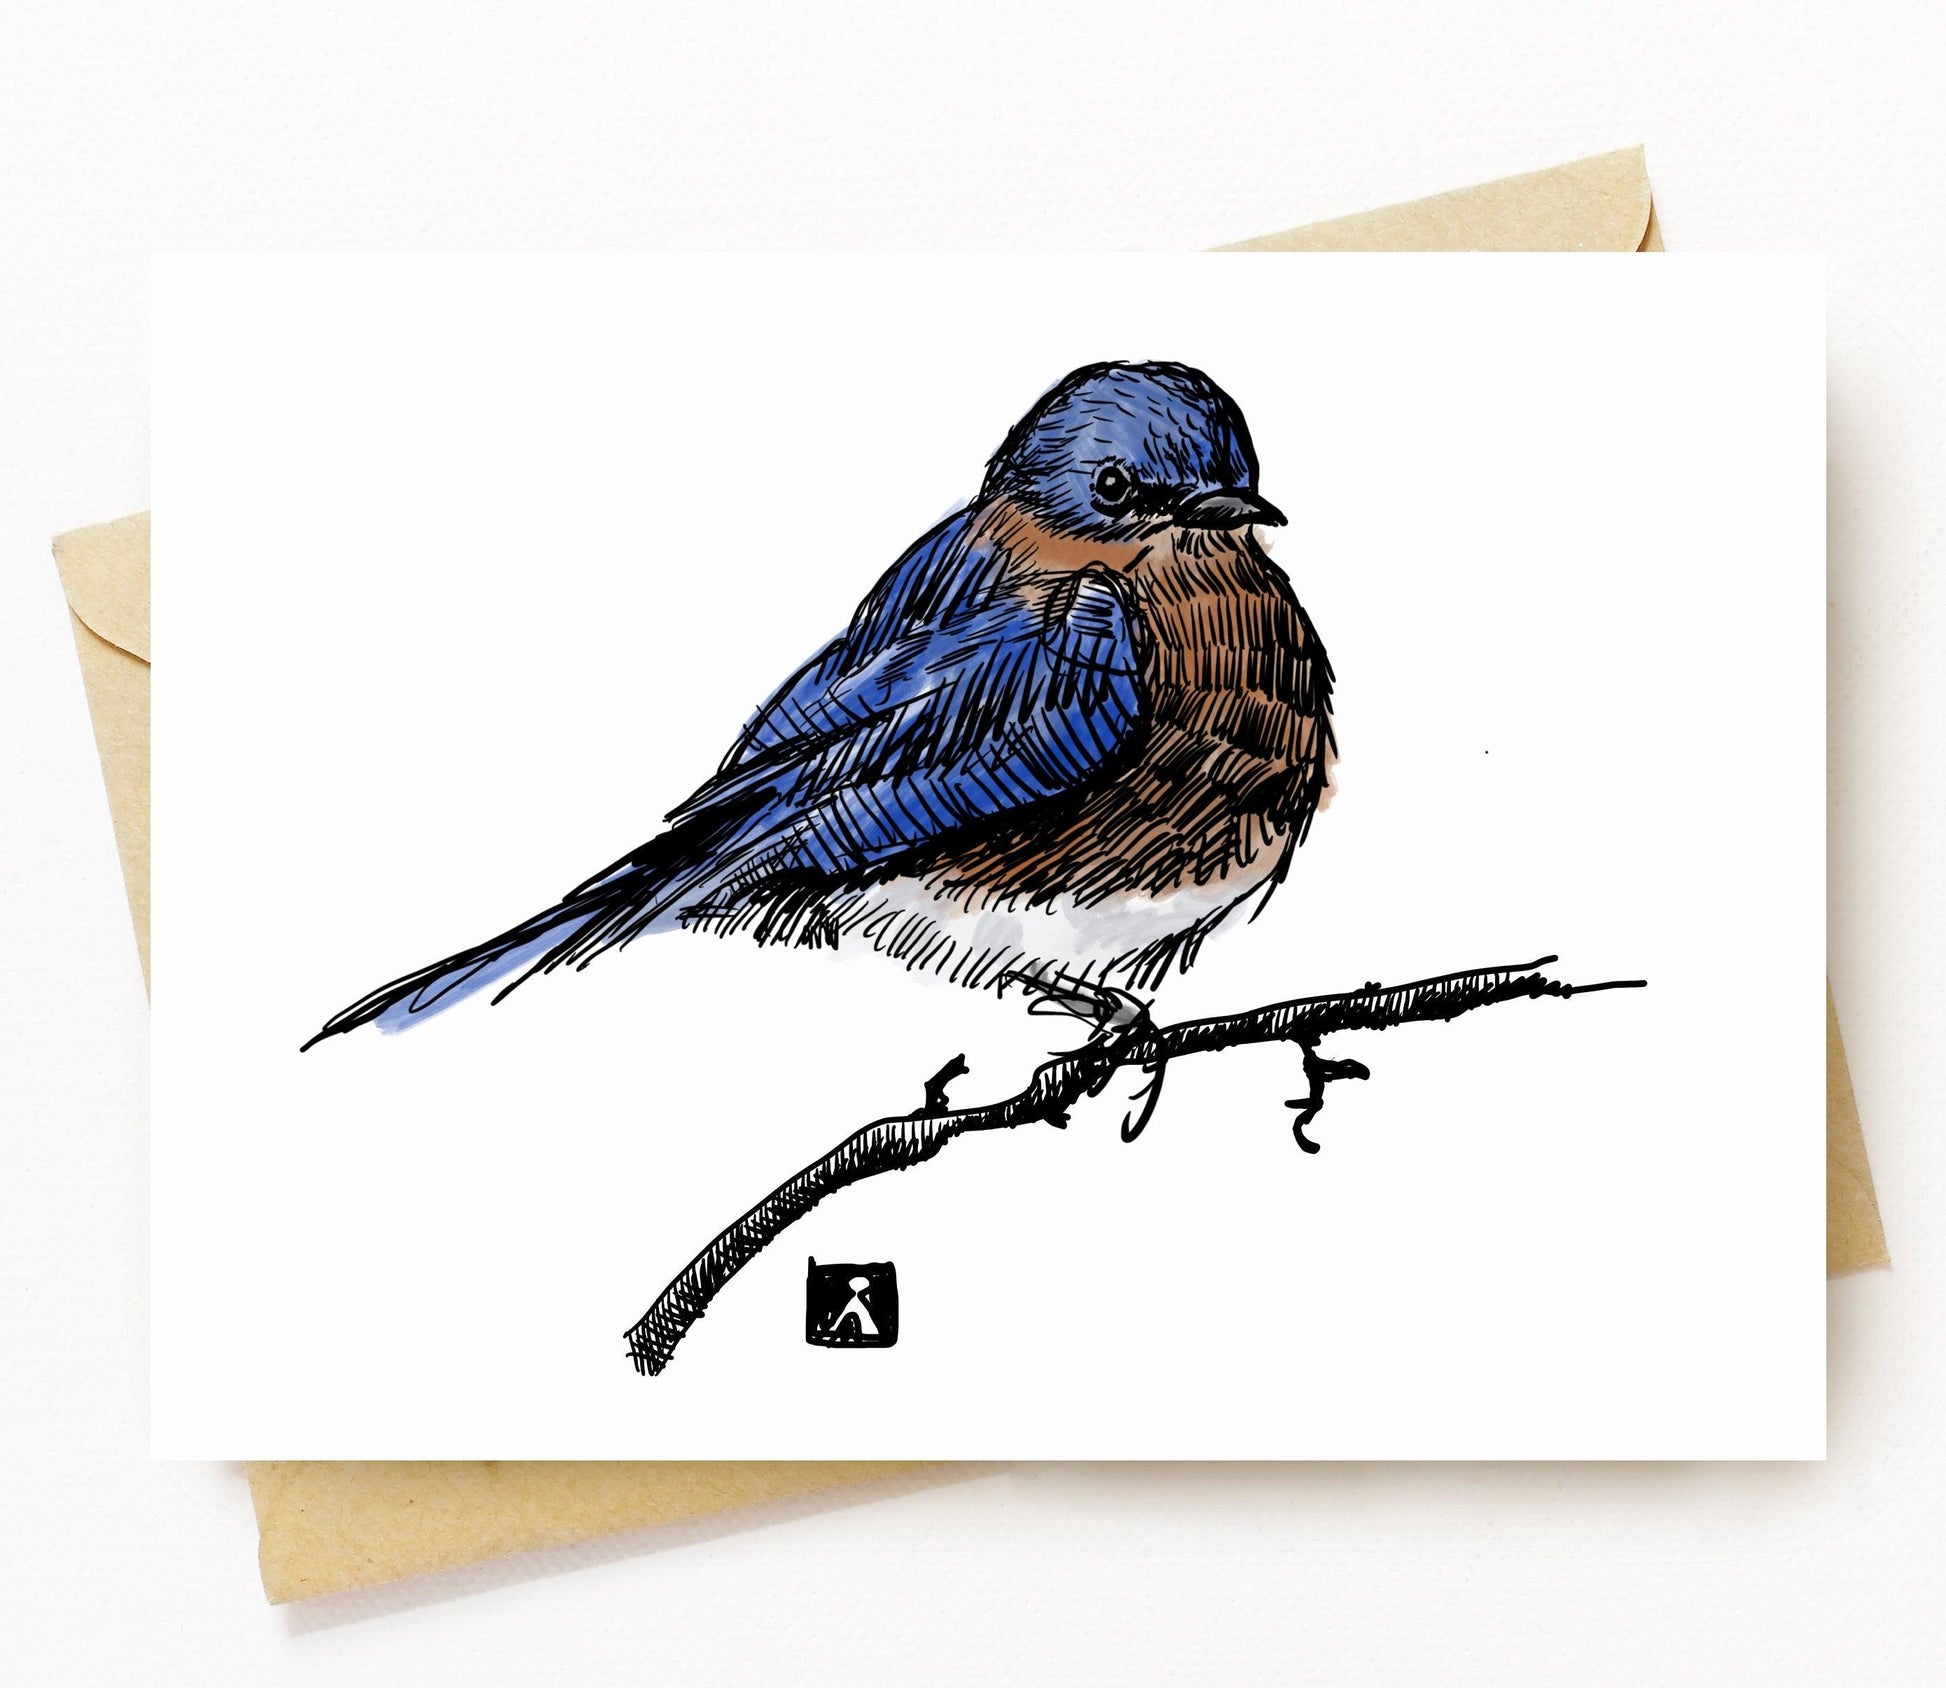 BellavanceInk: Greeting Card With An Eastern Blue Bird On A Tree Branch Pen & Ink Watercolor Illustration 5 x 7 Inches - BellavanceInk